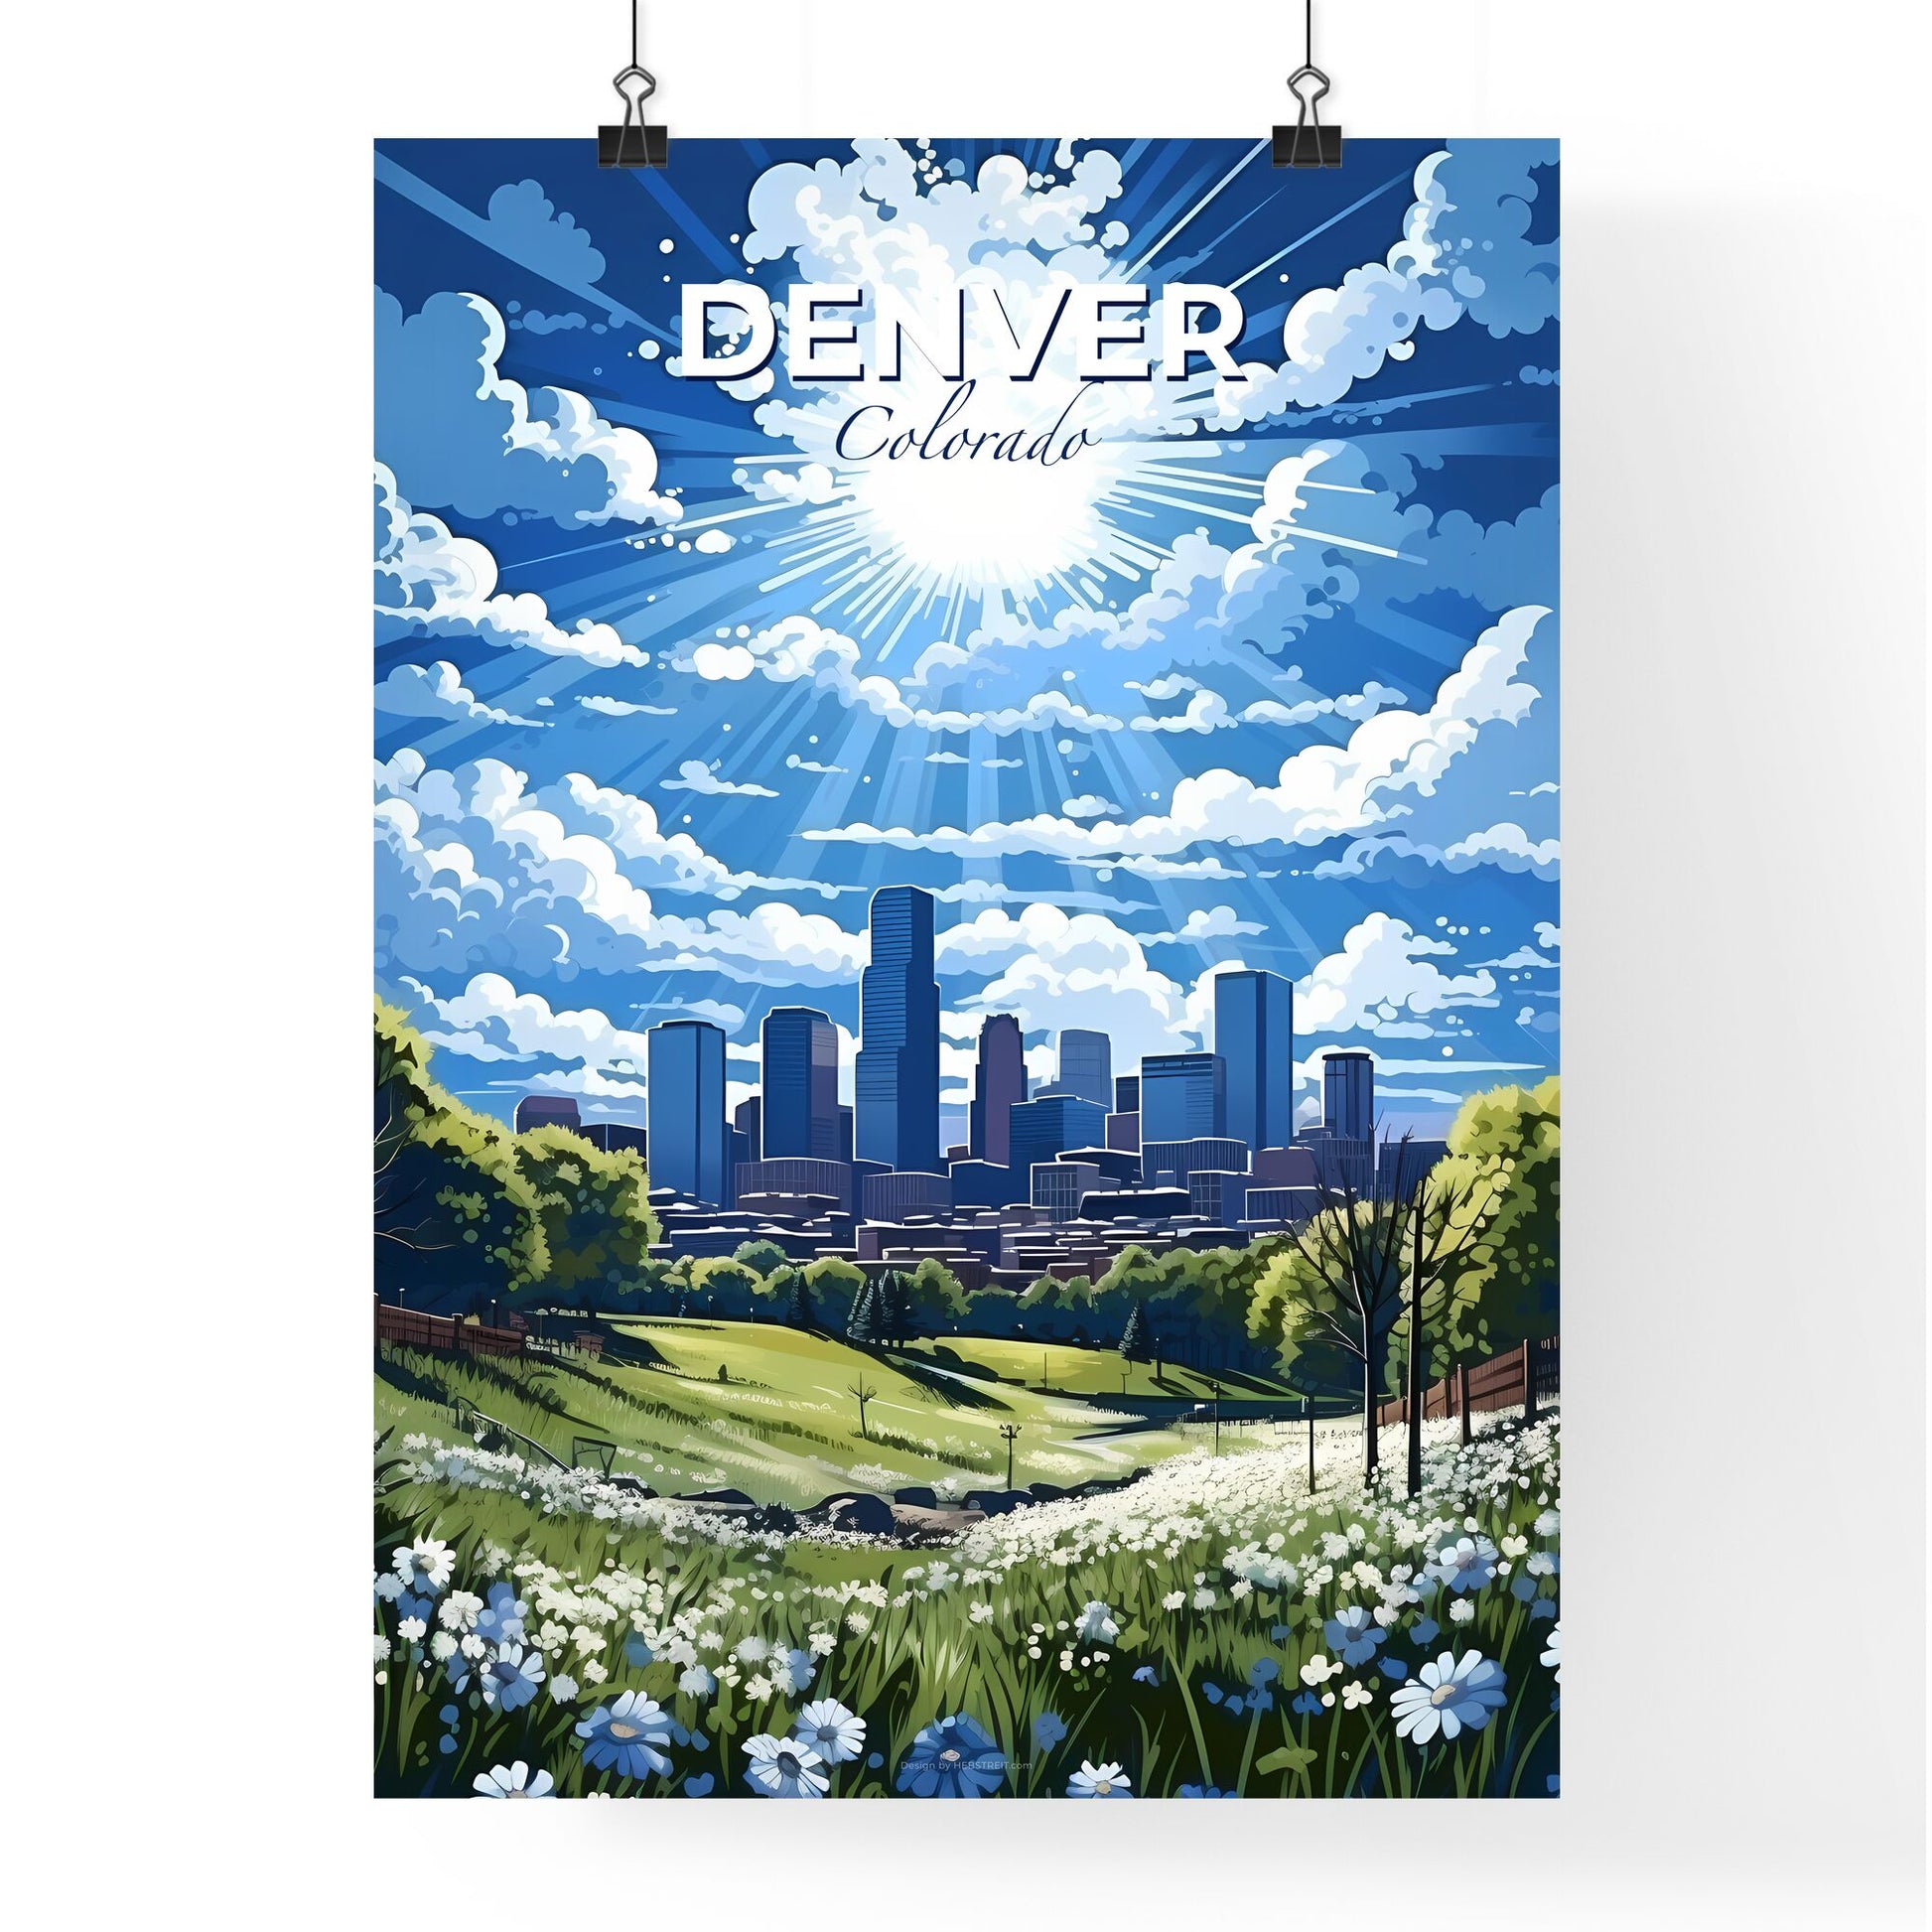 Denver Colorado Skyline - A City Landscape With A City In The Background - Customizable Travel Gift Default Title